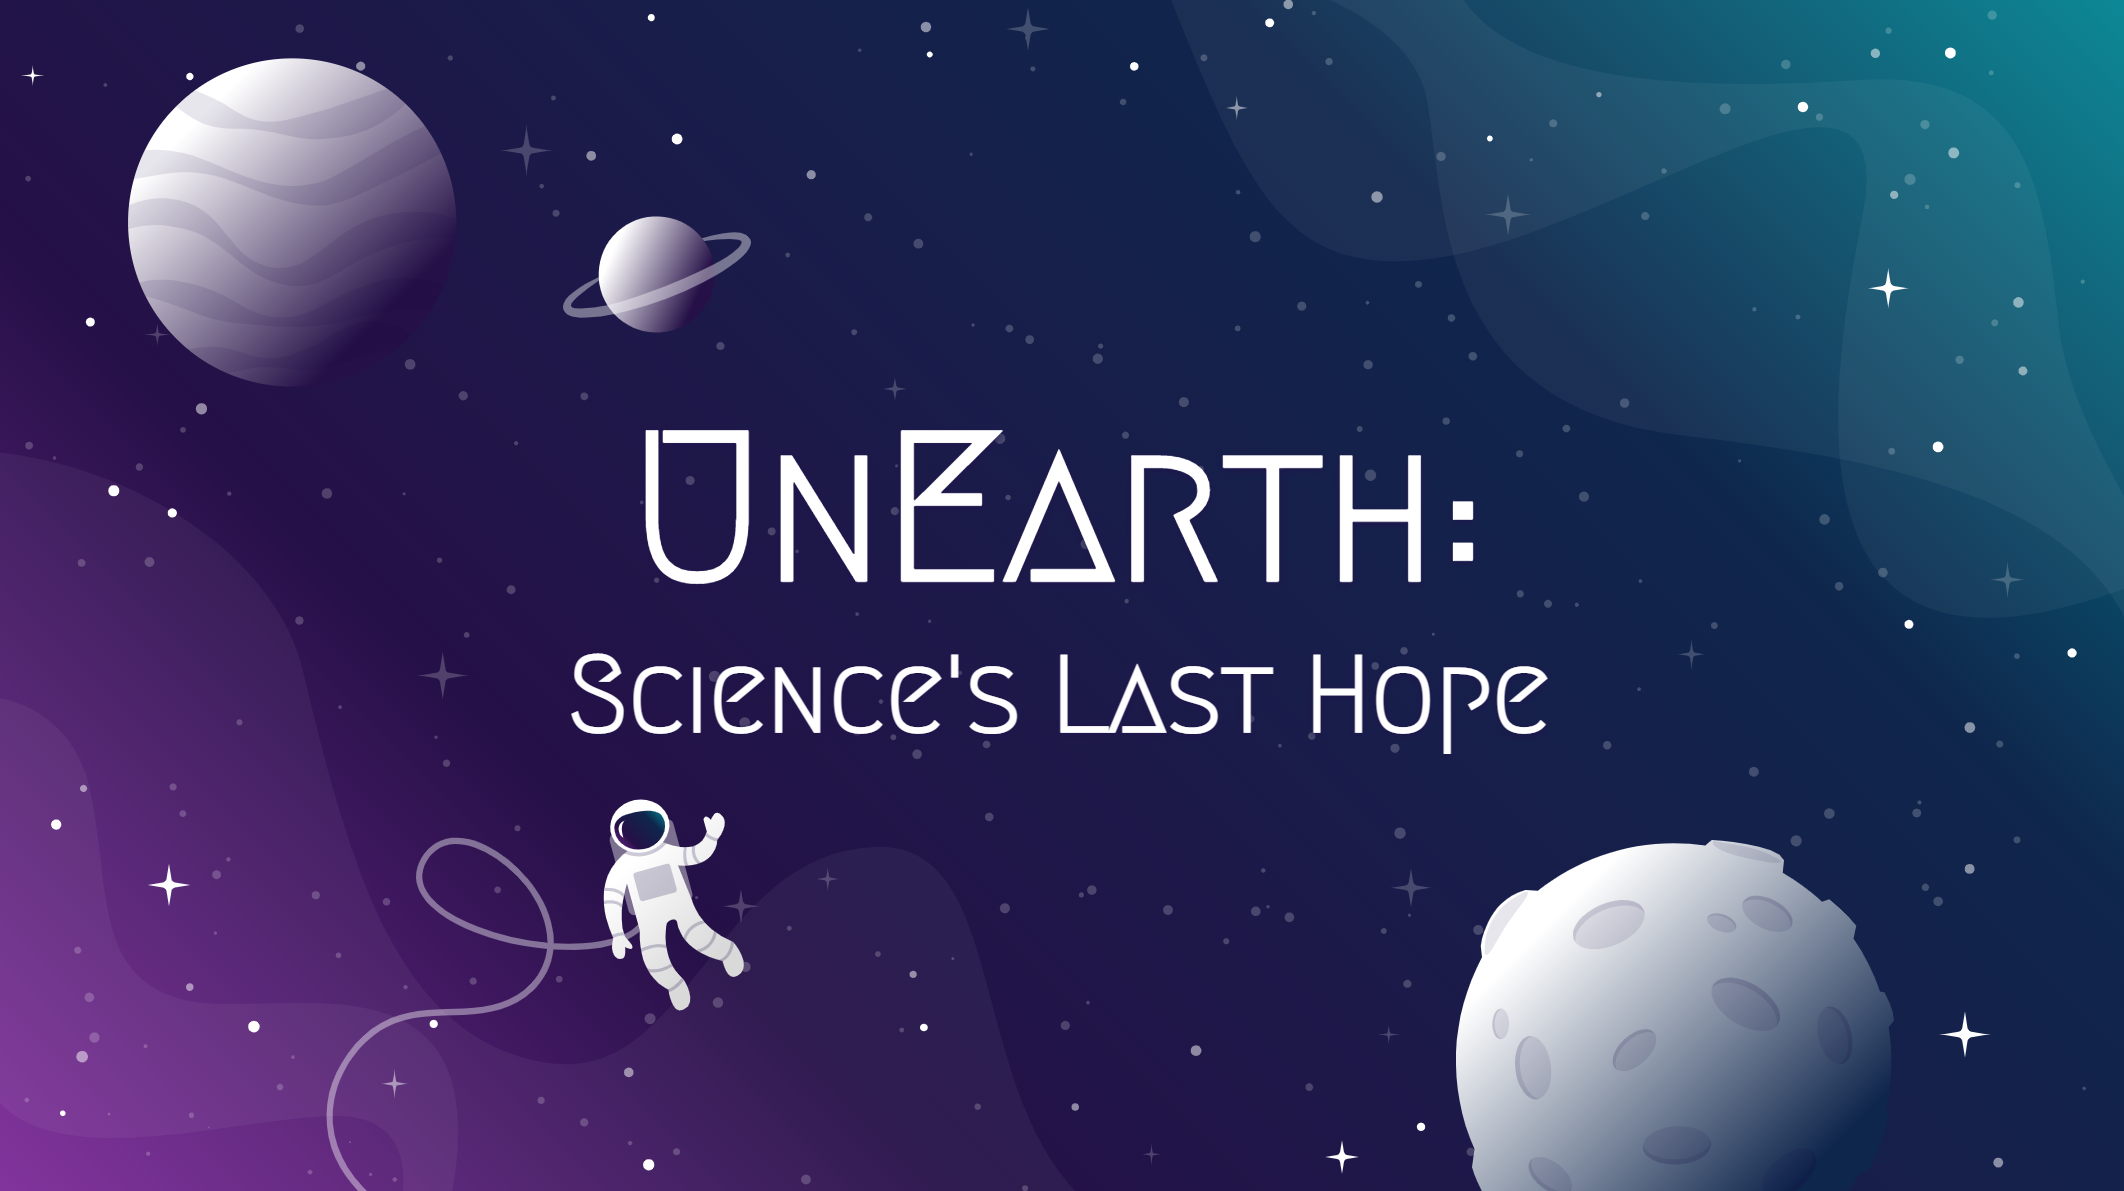 UnEarth: Science’s Last Hope